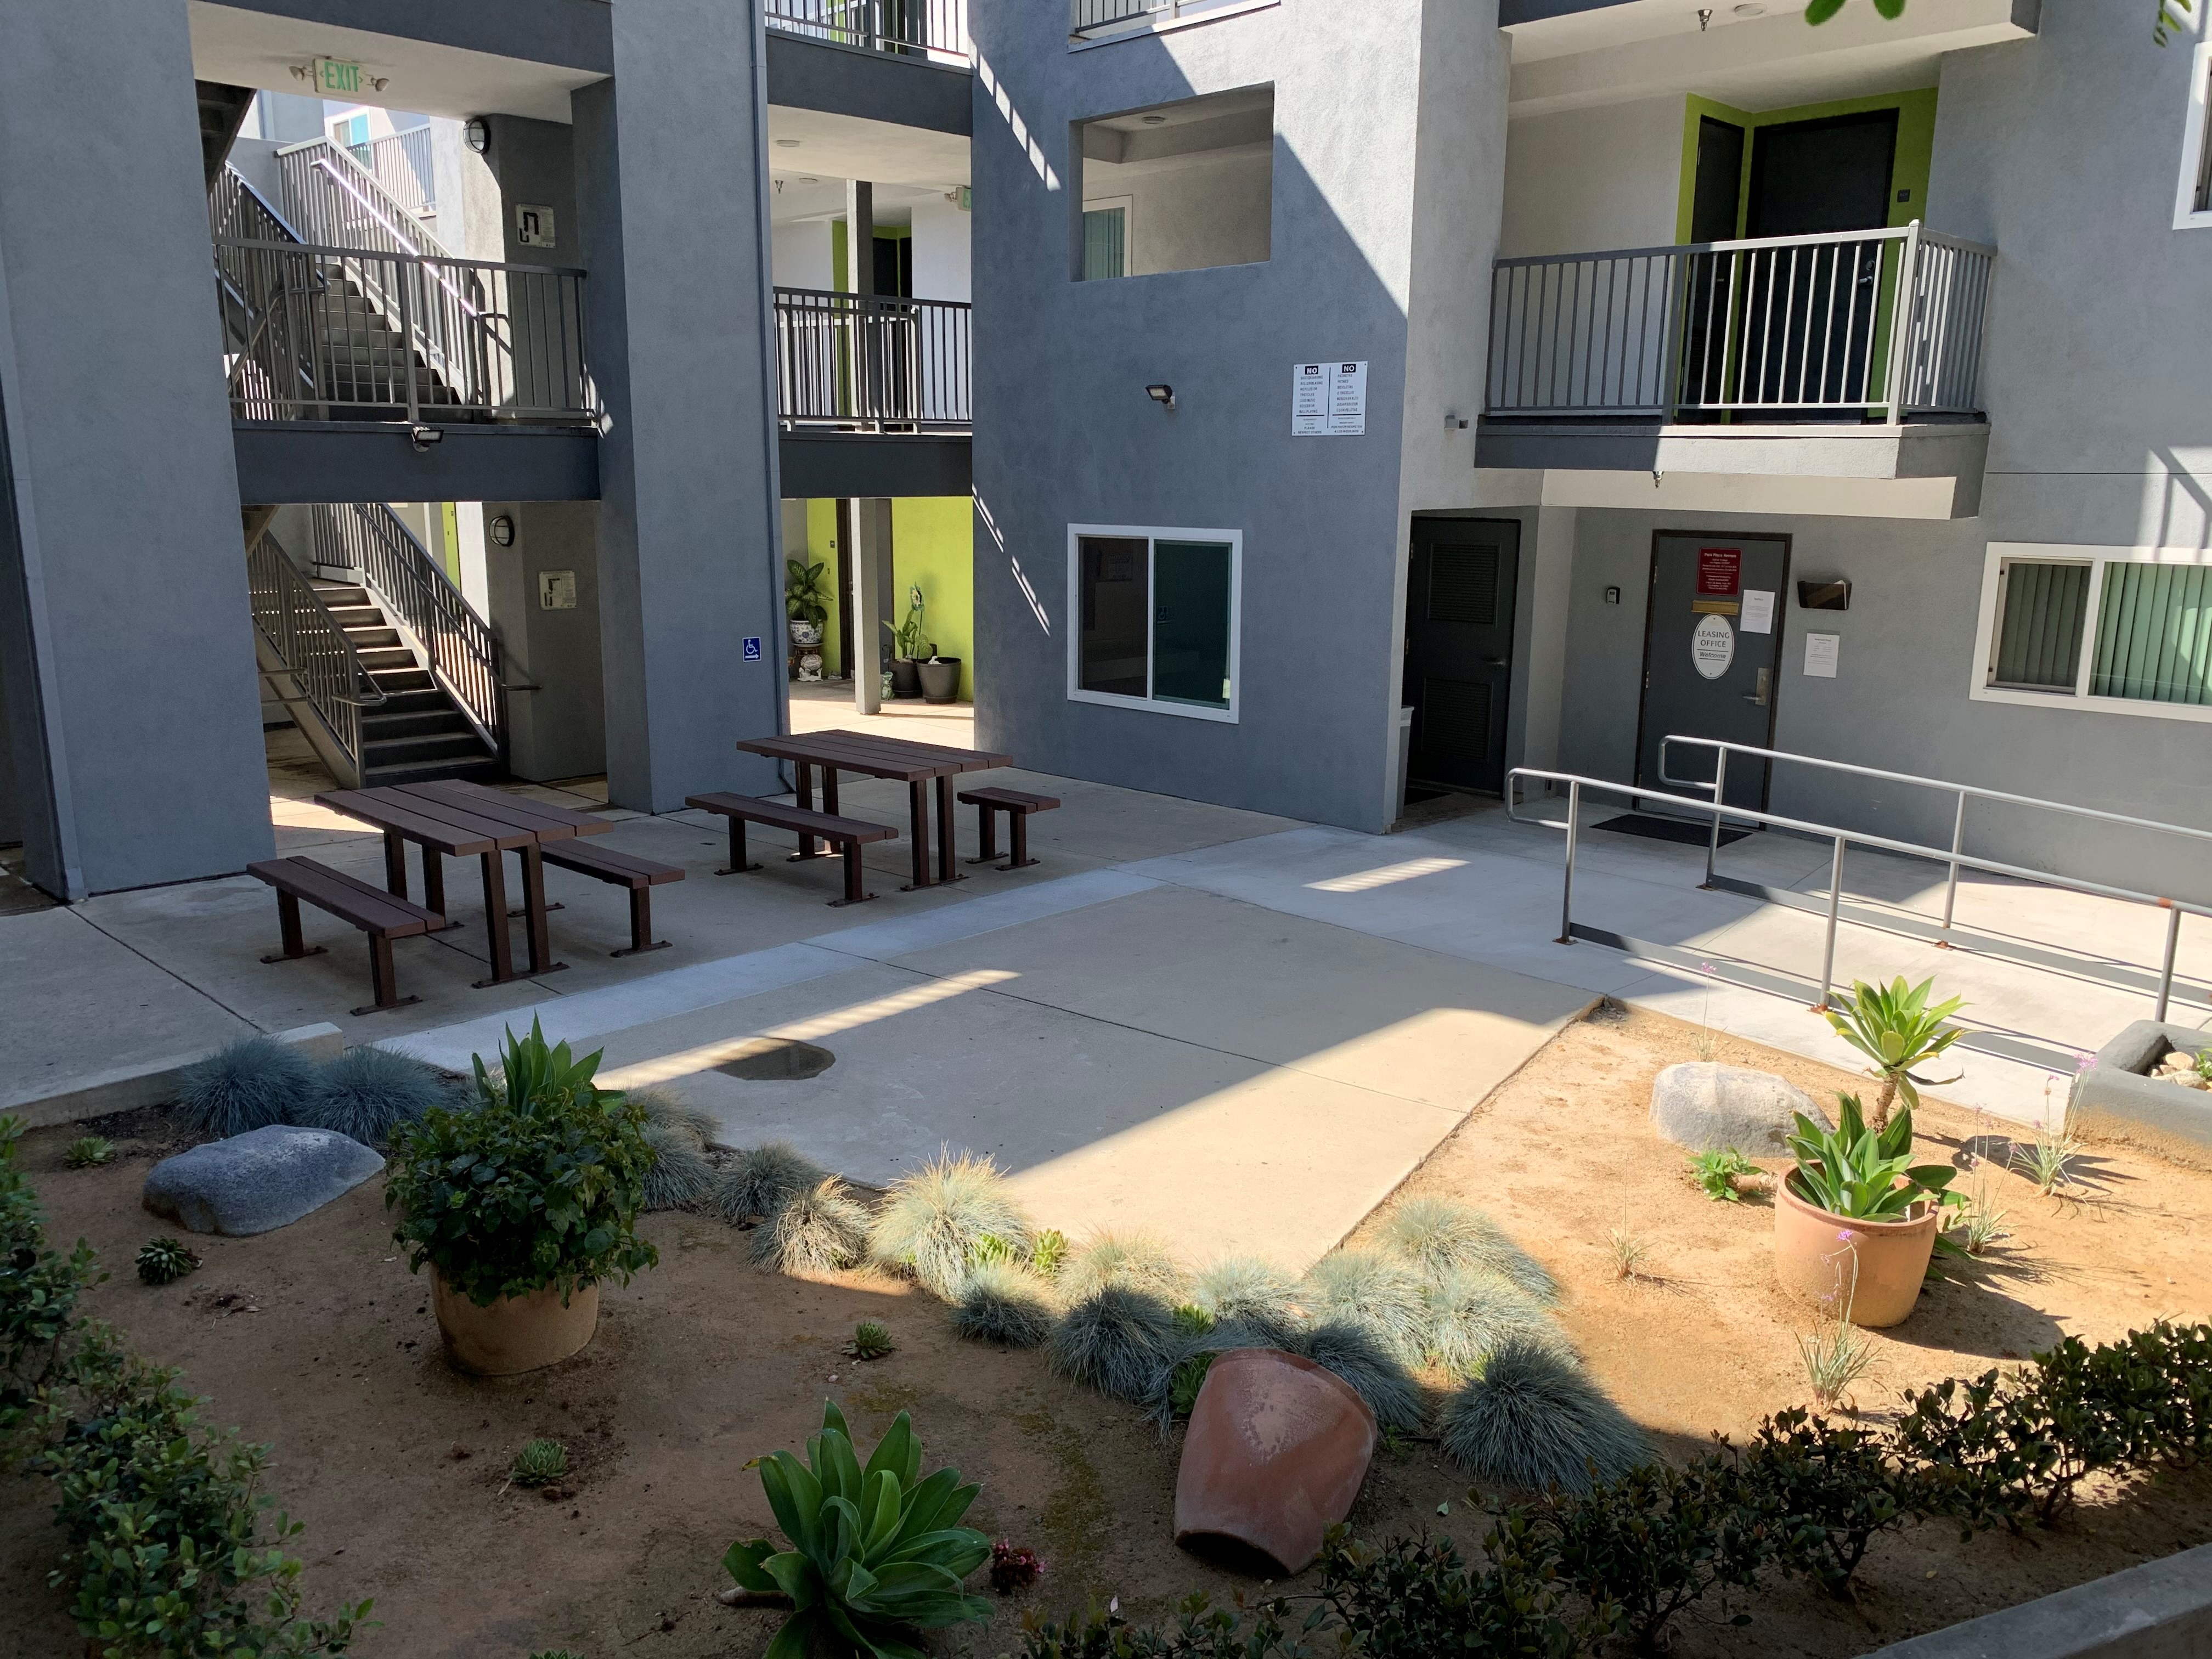 New Park Place courtyard area. accessibility ramp leading into area. Picnic table seating. Desert garden landscaping